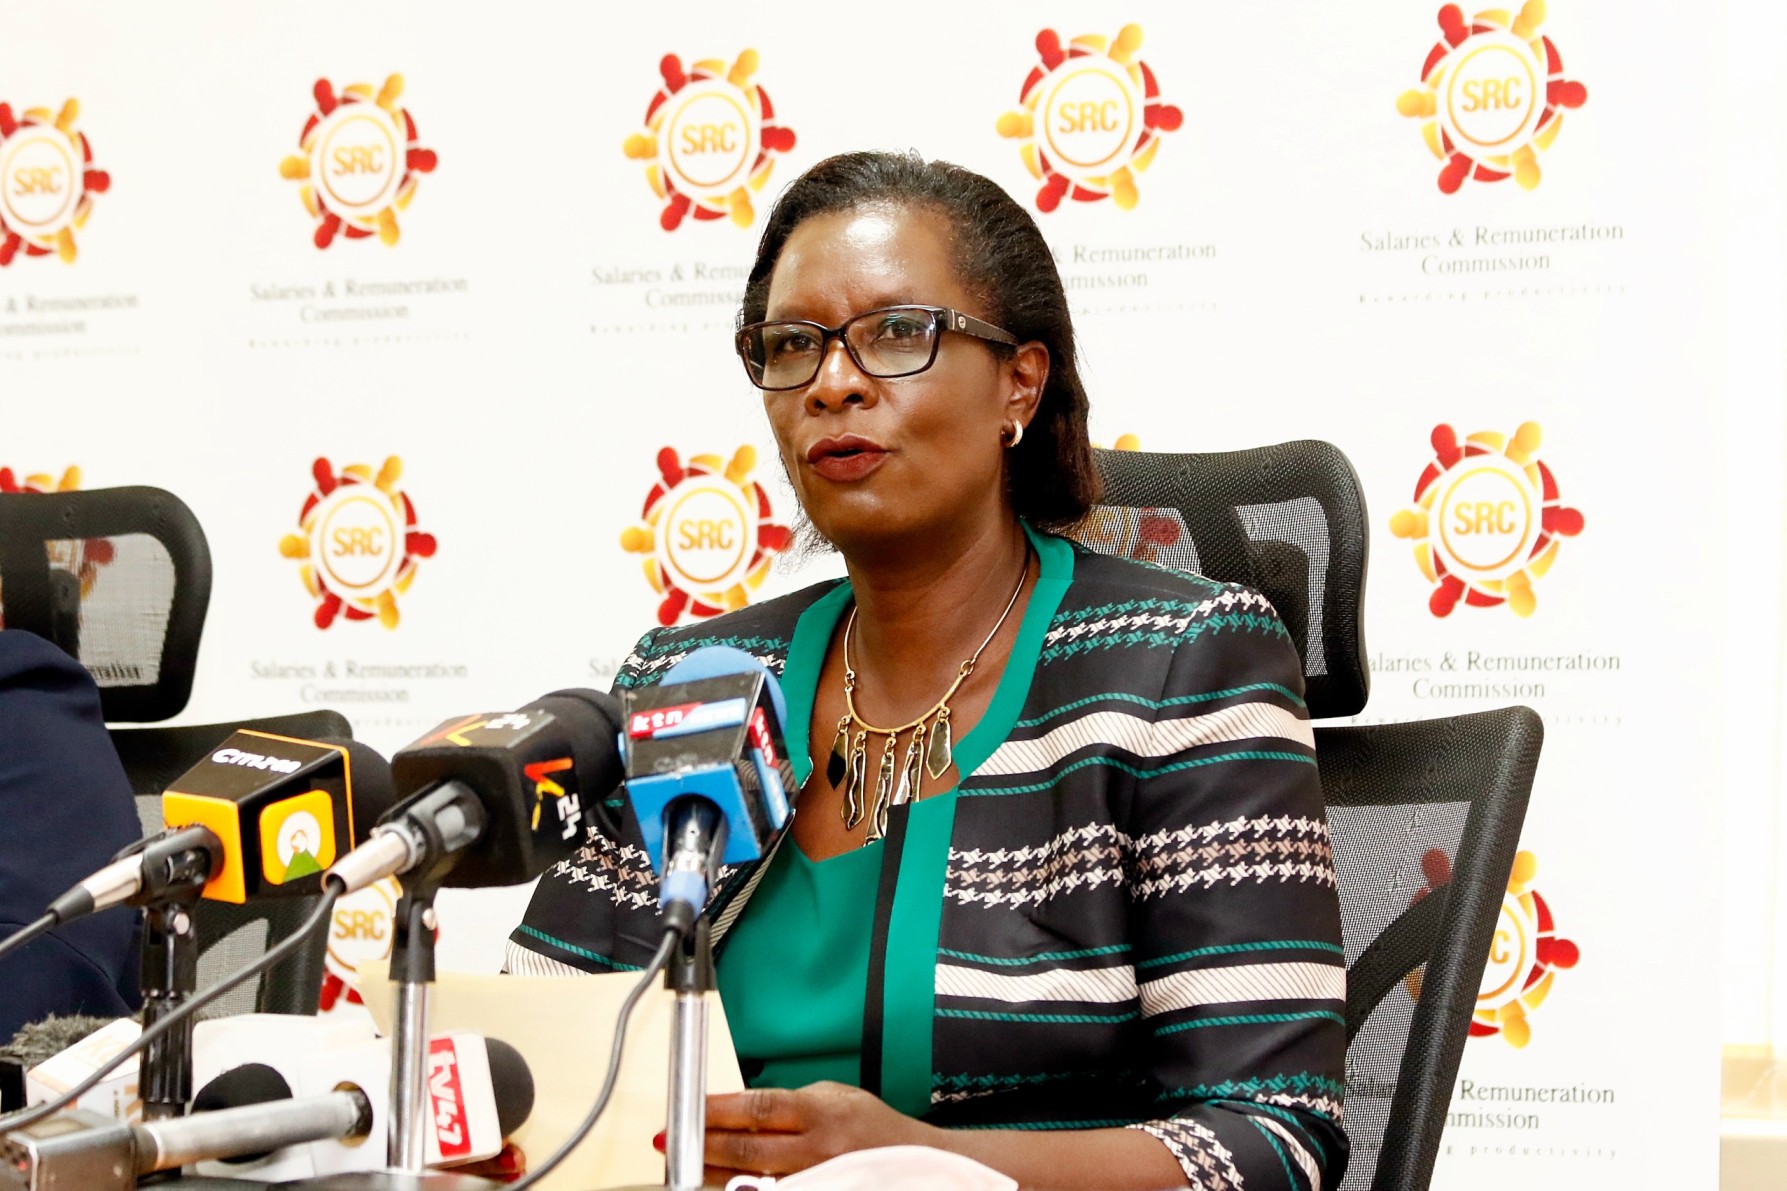 SRC halts salary increments for State officers amid economic pressures